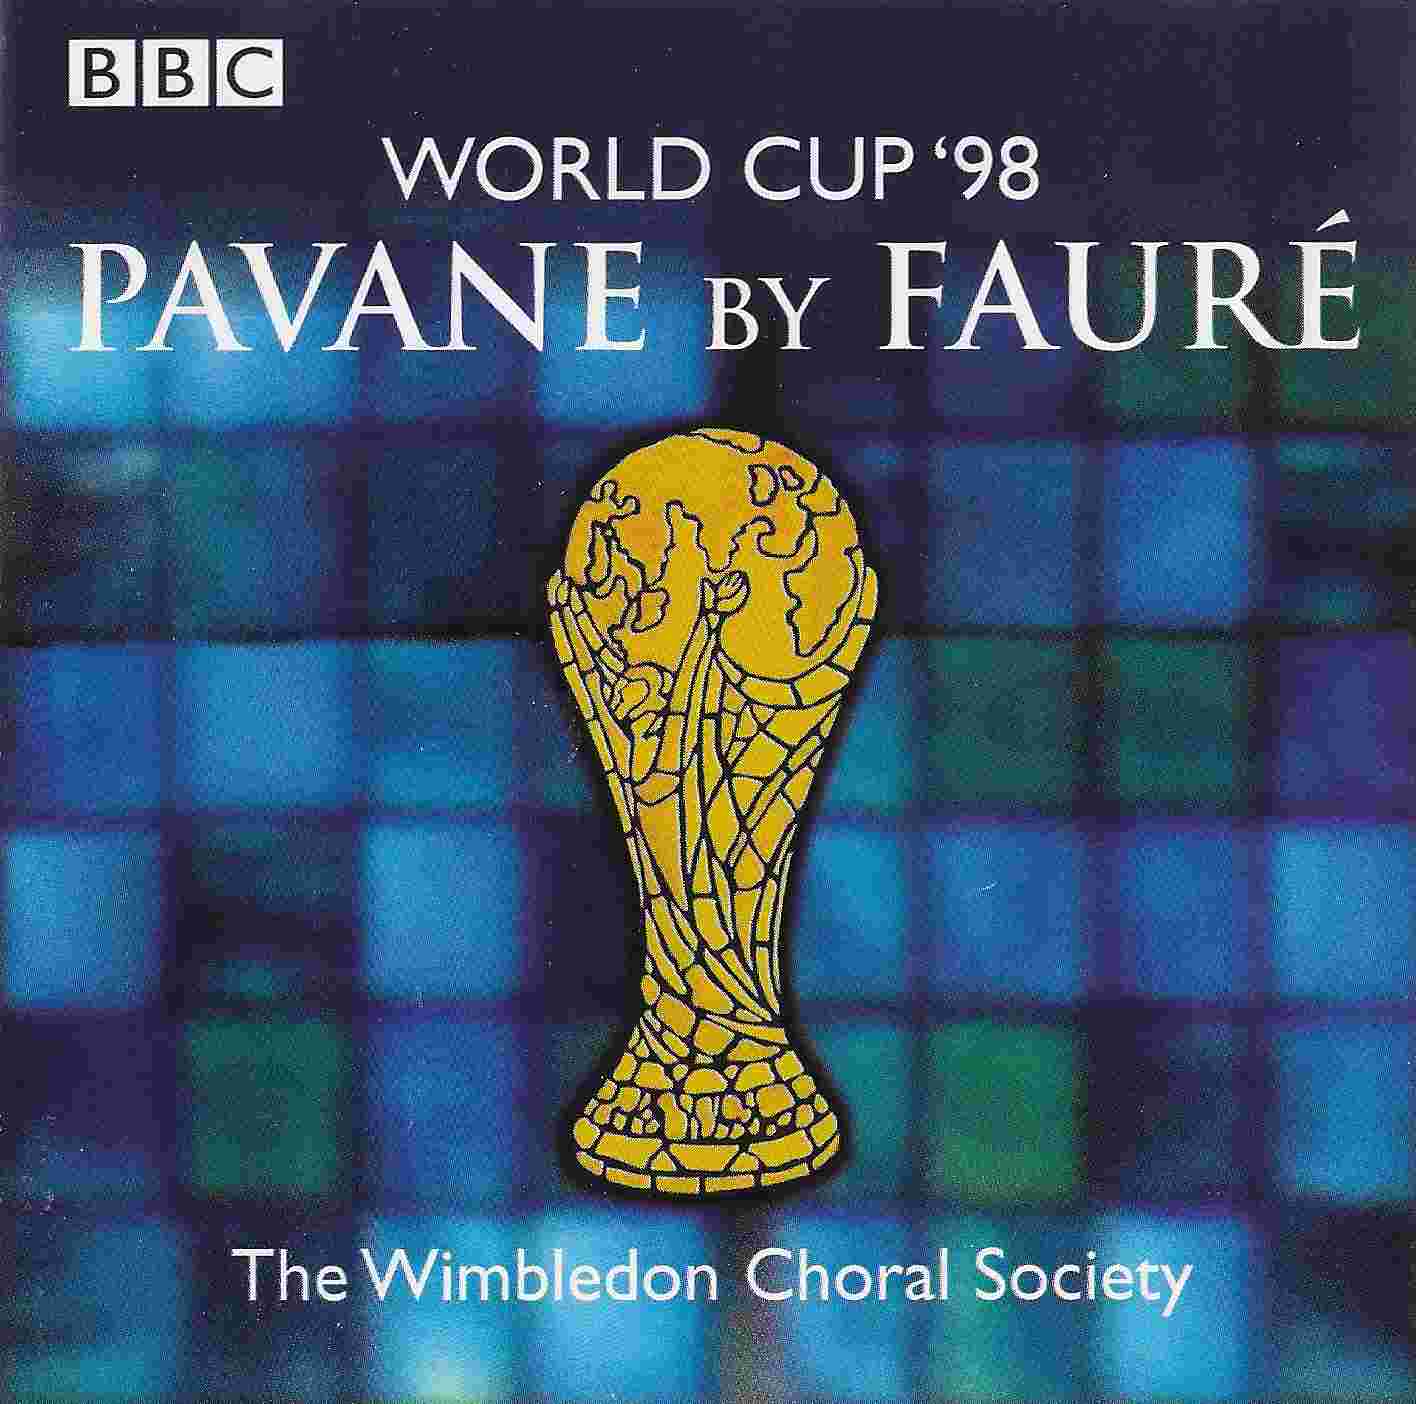 Picture of Pavane (World Cup '98) by artist Gabriel Faure / Arr. Elizabeth Parker / The Wimbledon Choral Society from the BBC cdsingles - Records and Tapes library